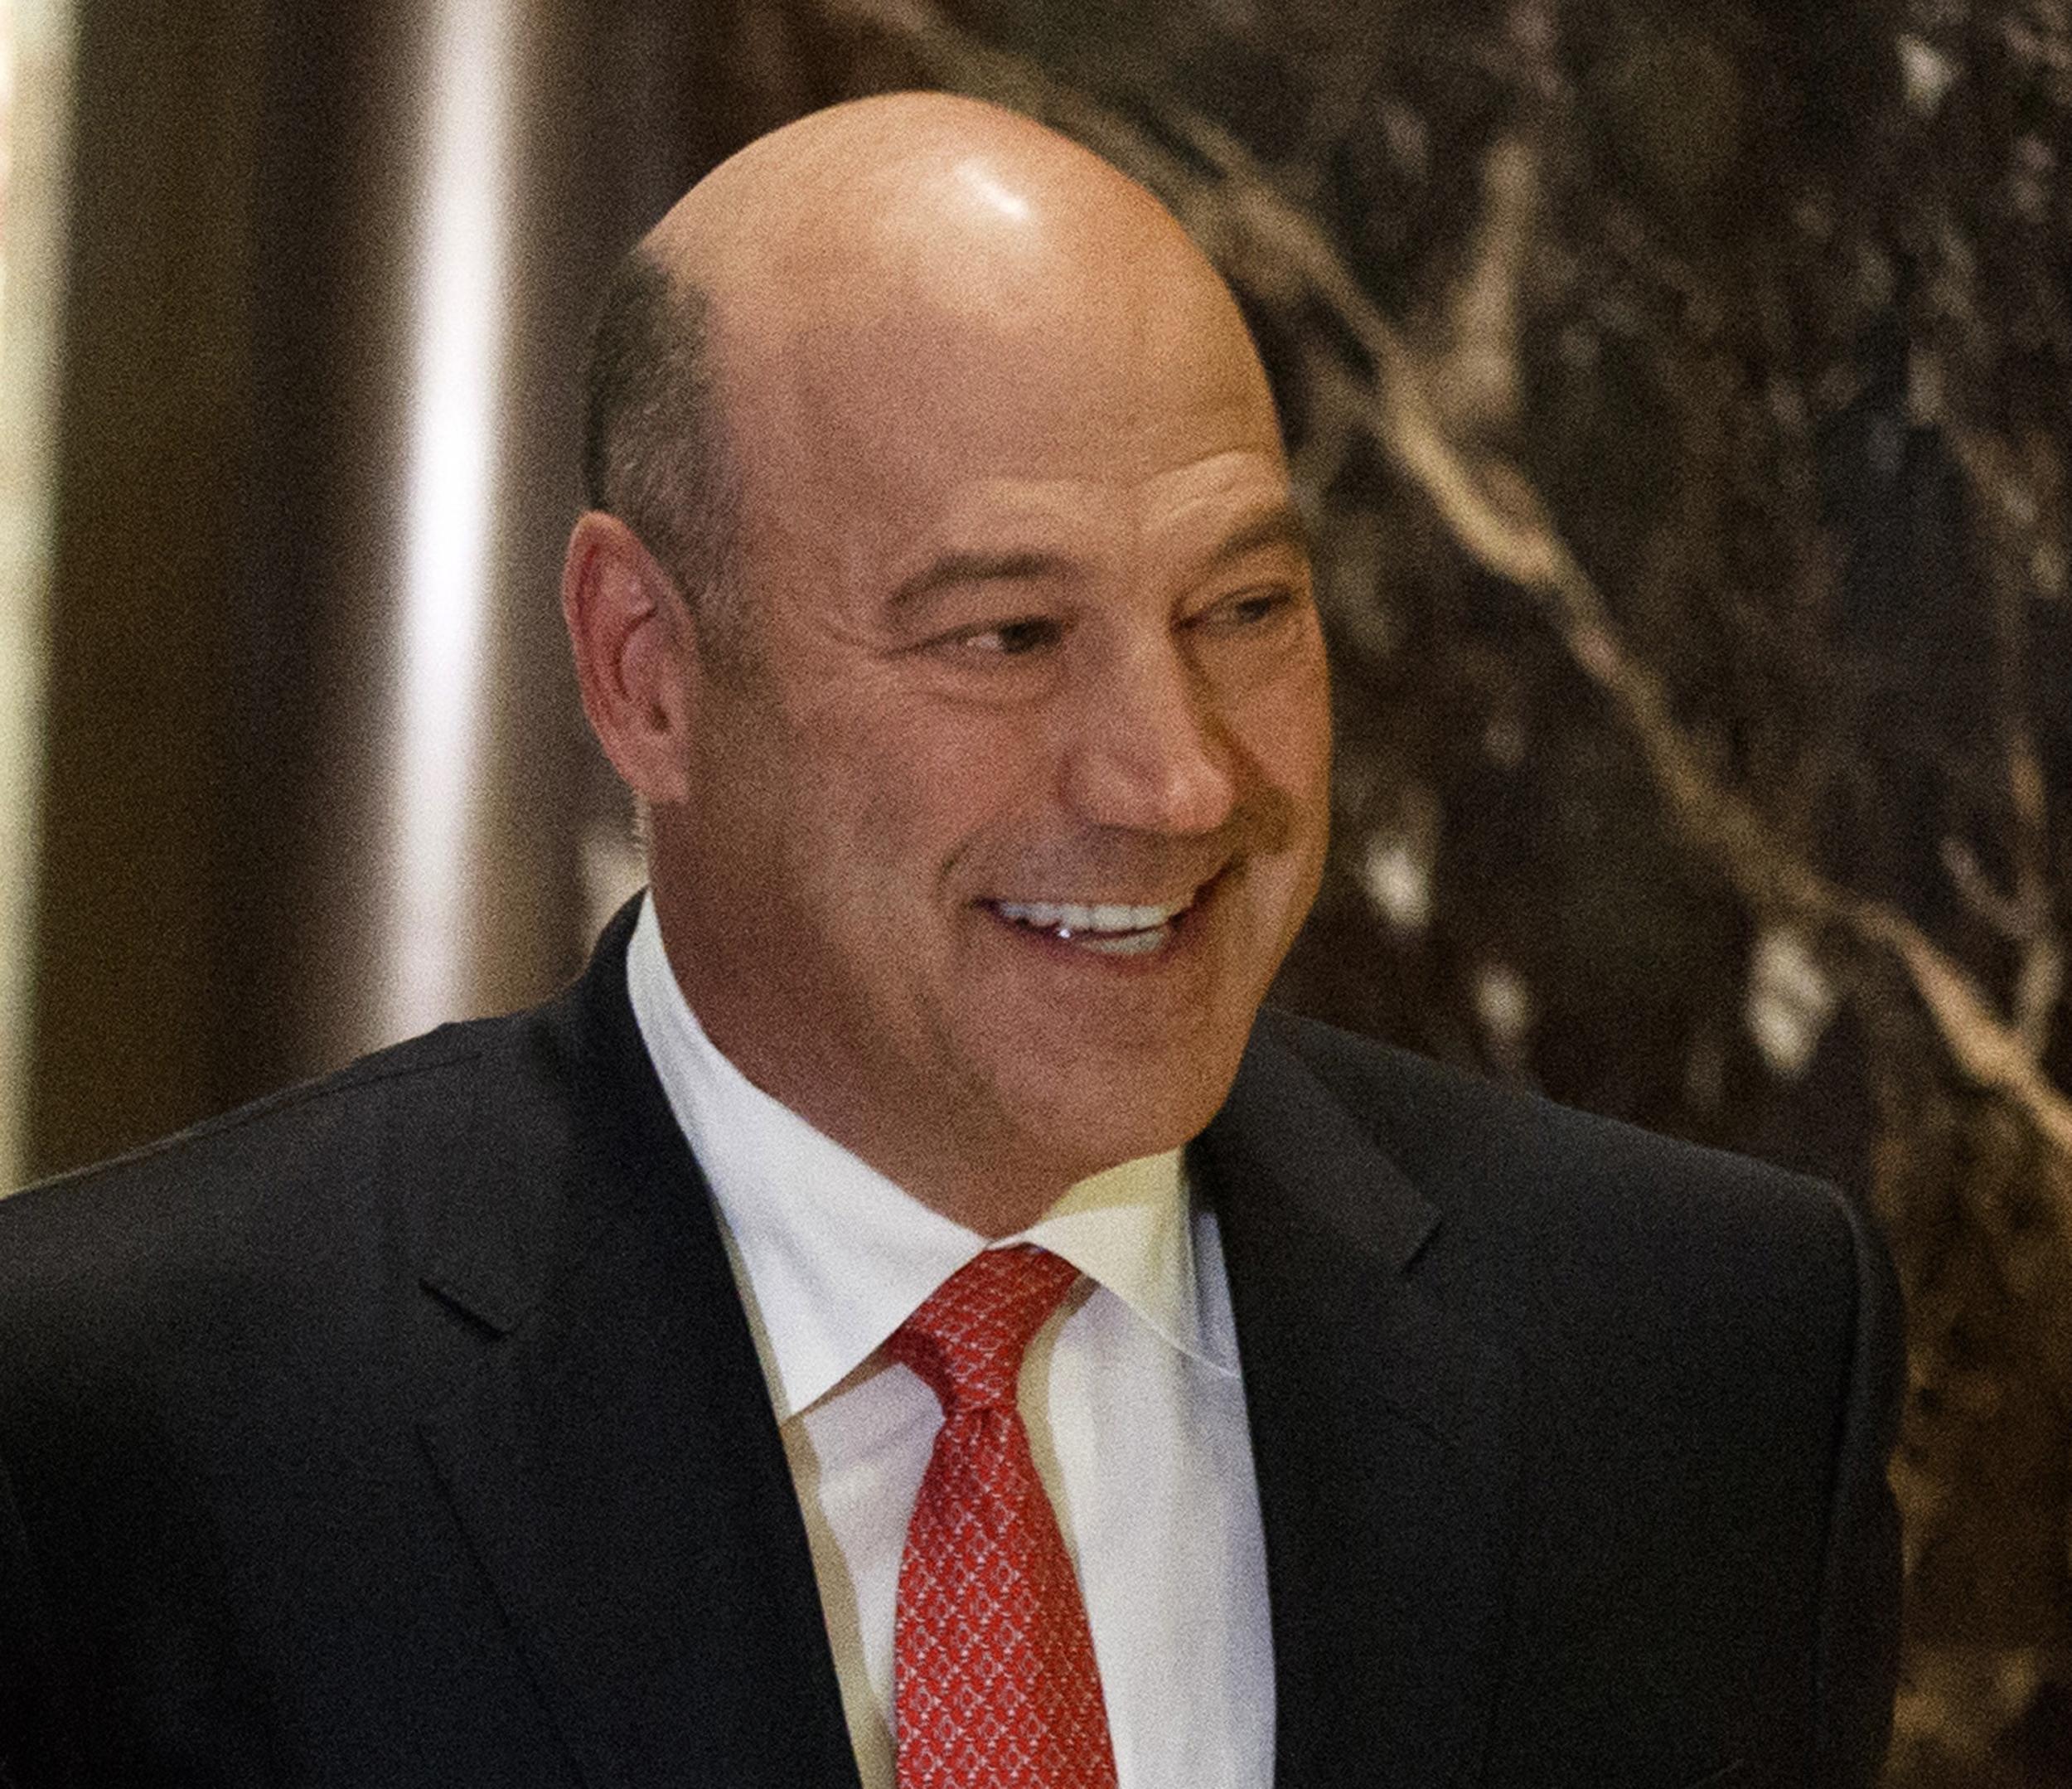 Gary Cohn will benefit personally from the role in government - at least $212 million, in fact